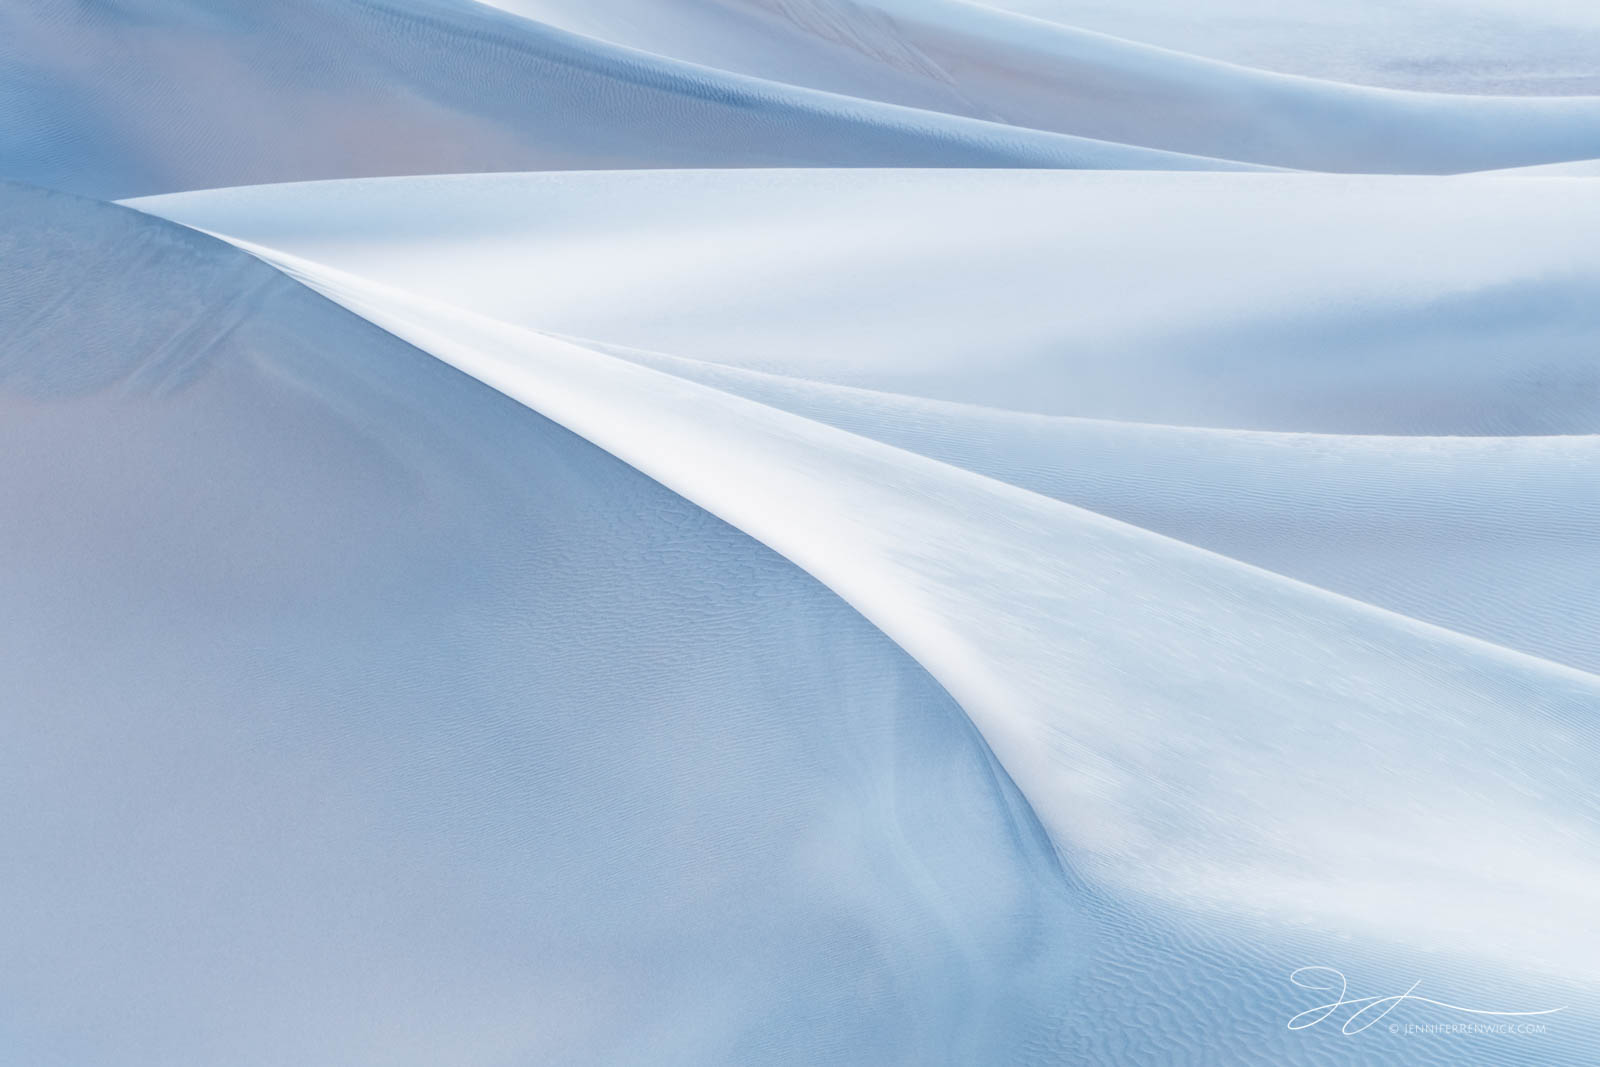 Pristine dunes seem to fold into each other during soft twilight light.